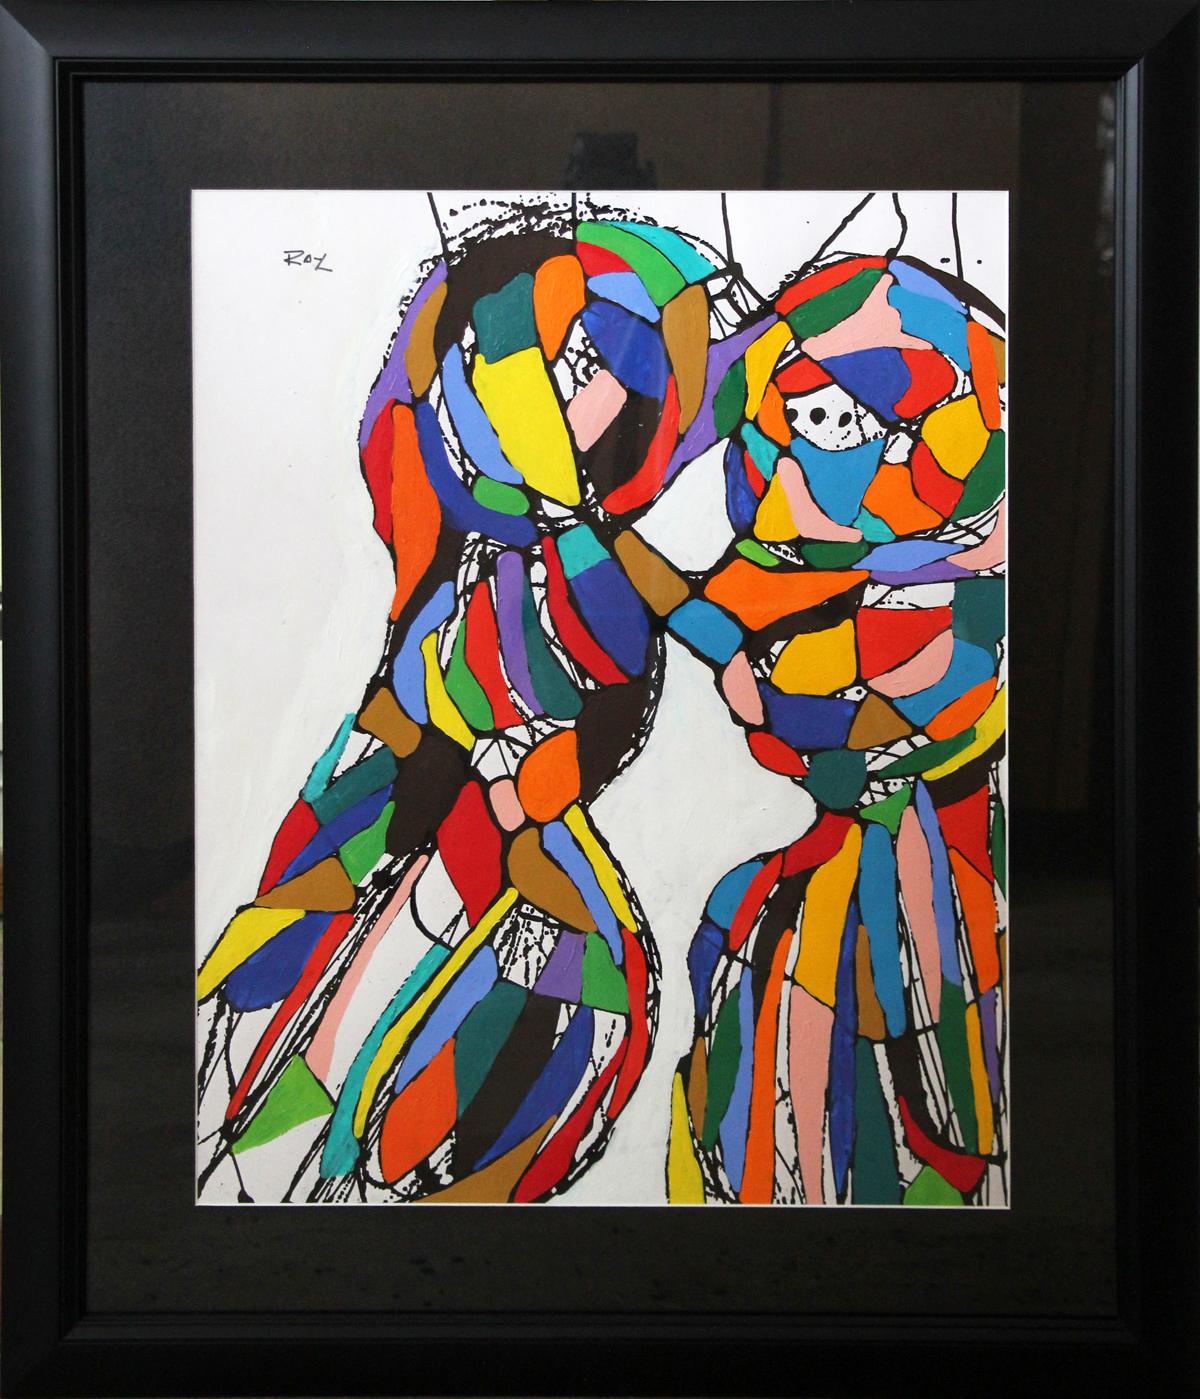 Ray Leight Figurative Painting - The Kiss, Figurative Abstraction, Acrylic on Paper, Modernist Abstract, 1995